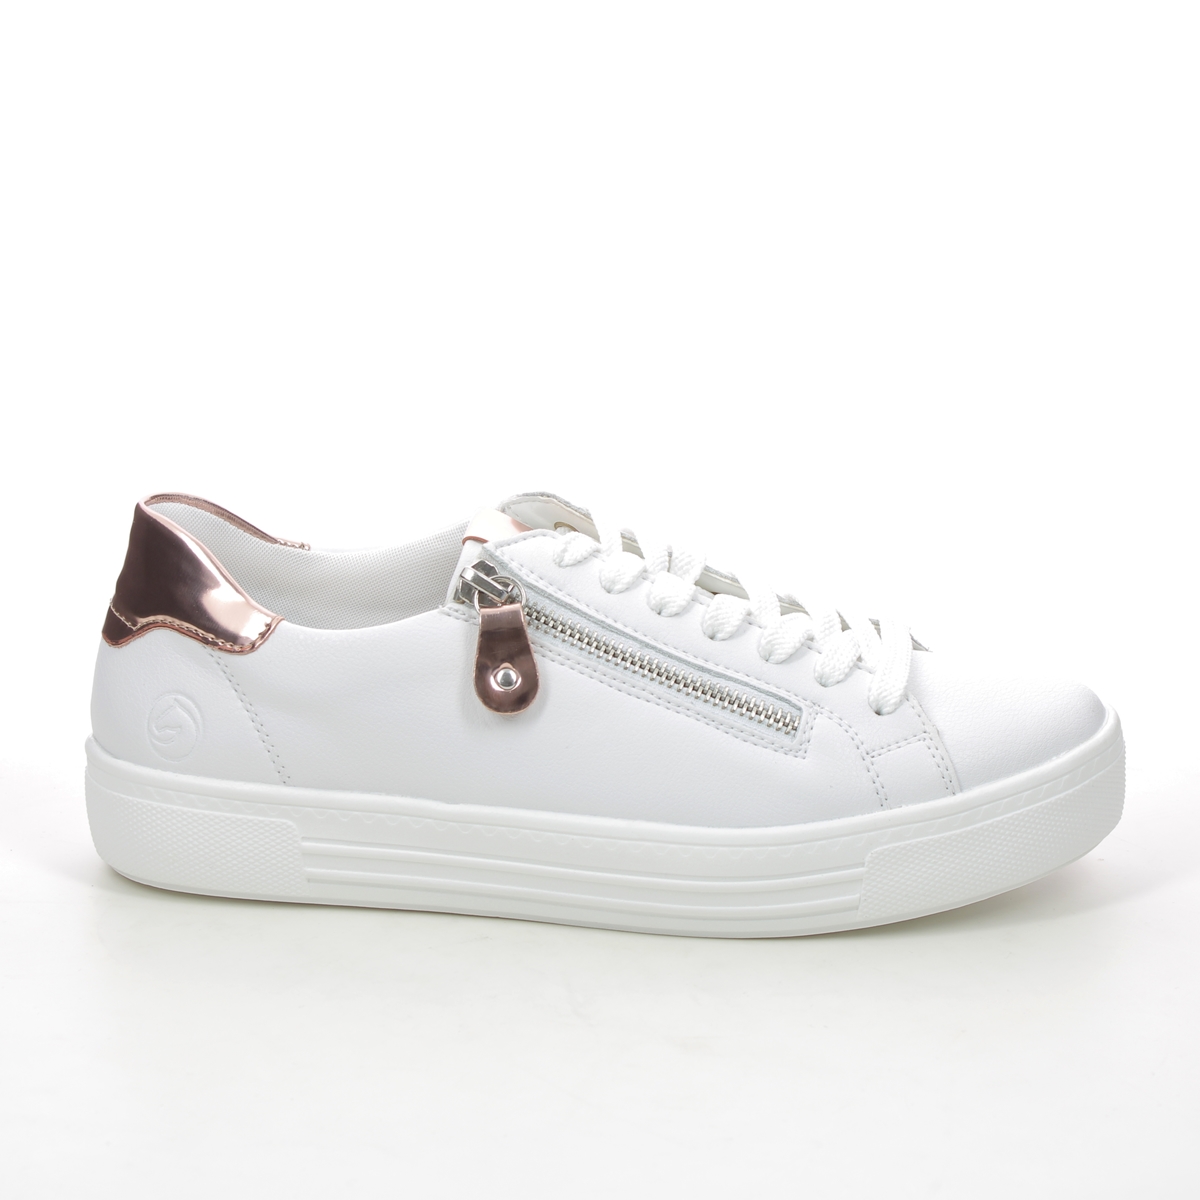 Remonte D0903-81 Altozip White Rose gold Womens trainers